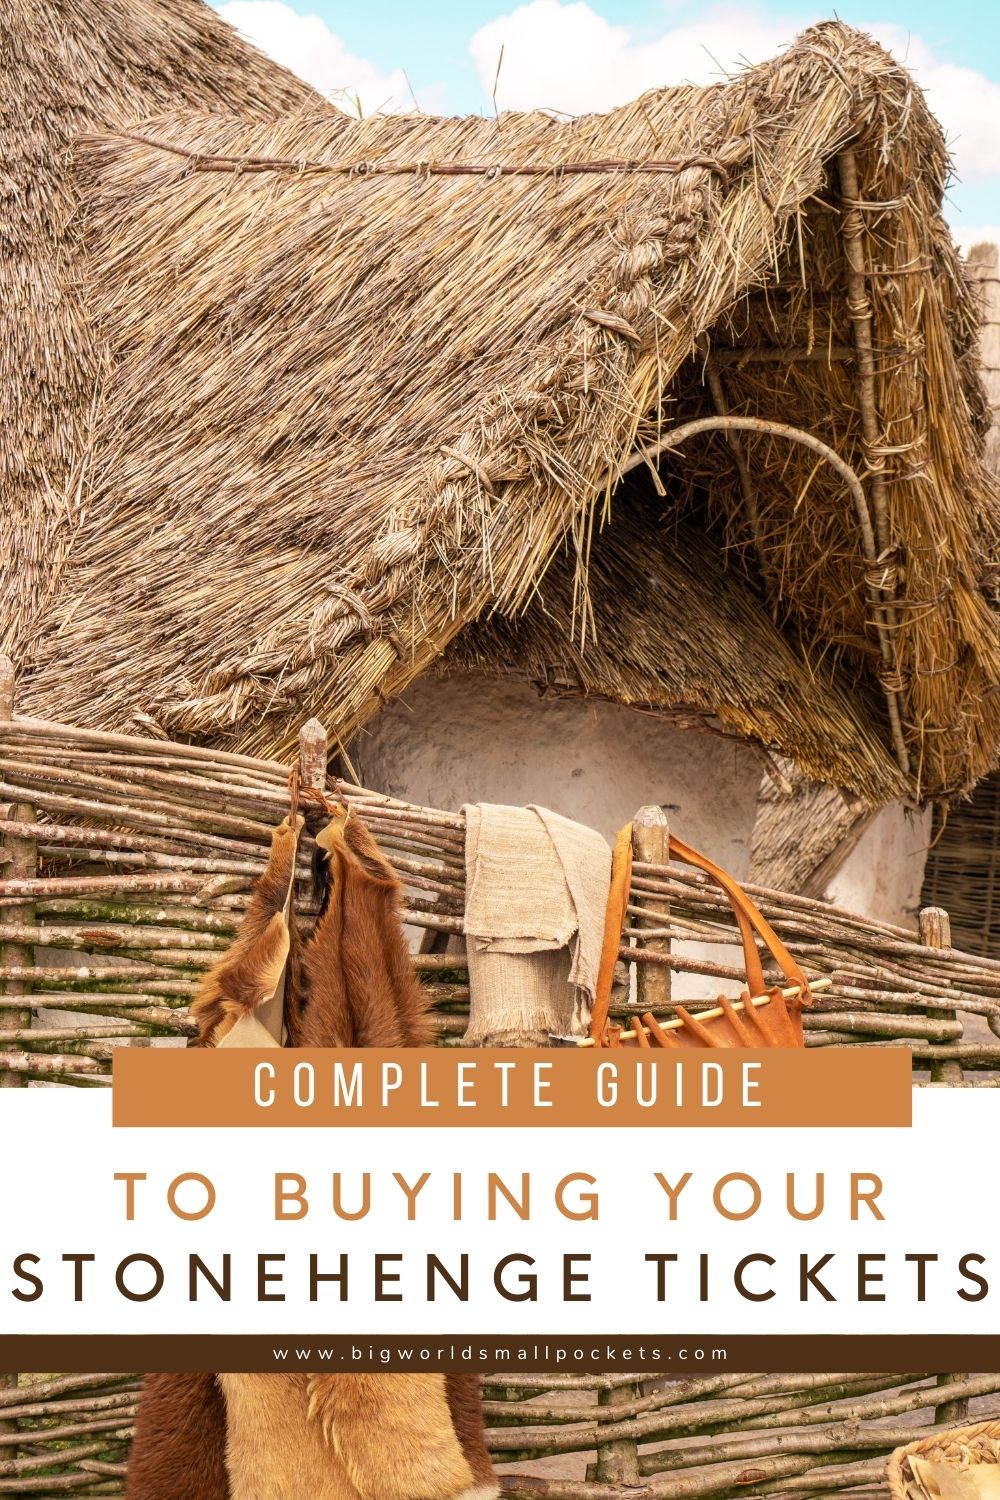 Full Guide to Buying Your Stonehenge Tickets, England